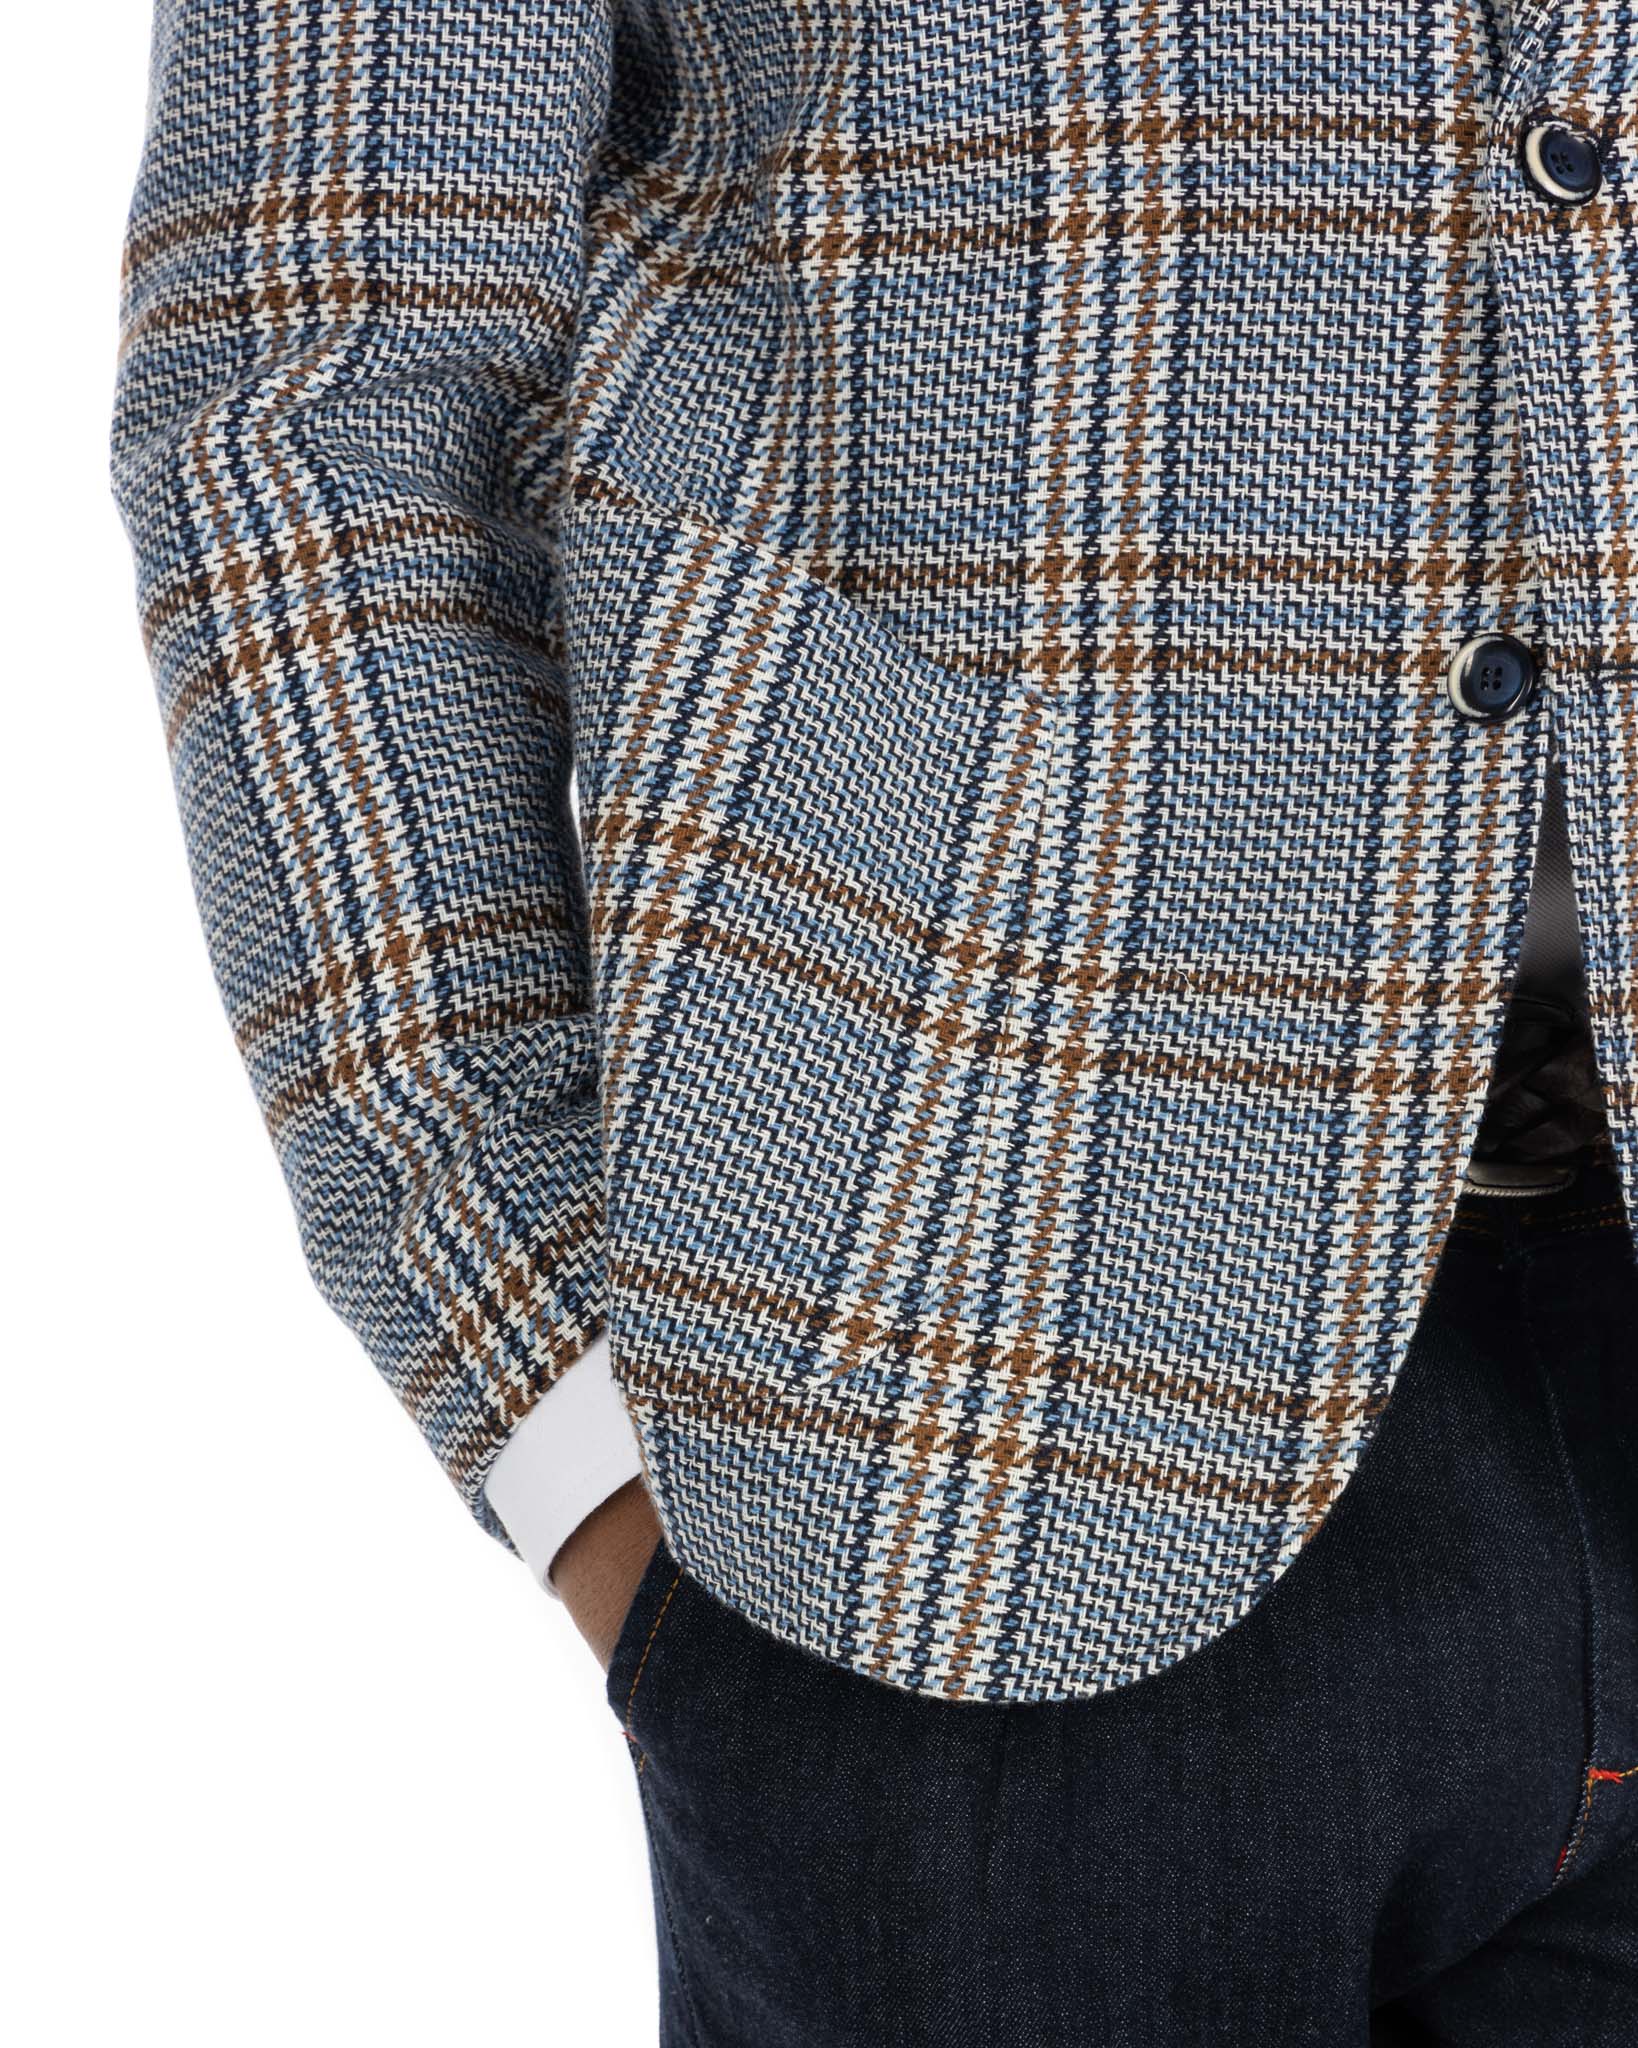 Parma - blue and brown checked jacket